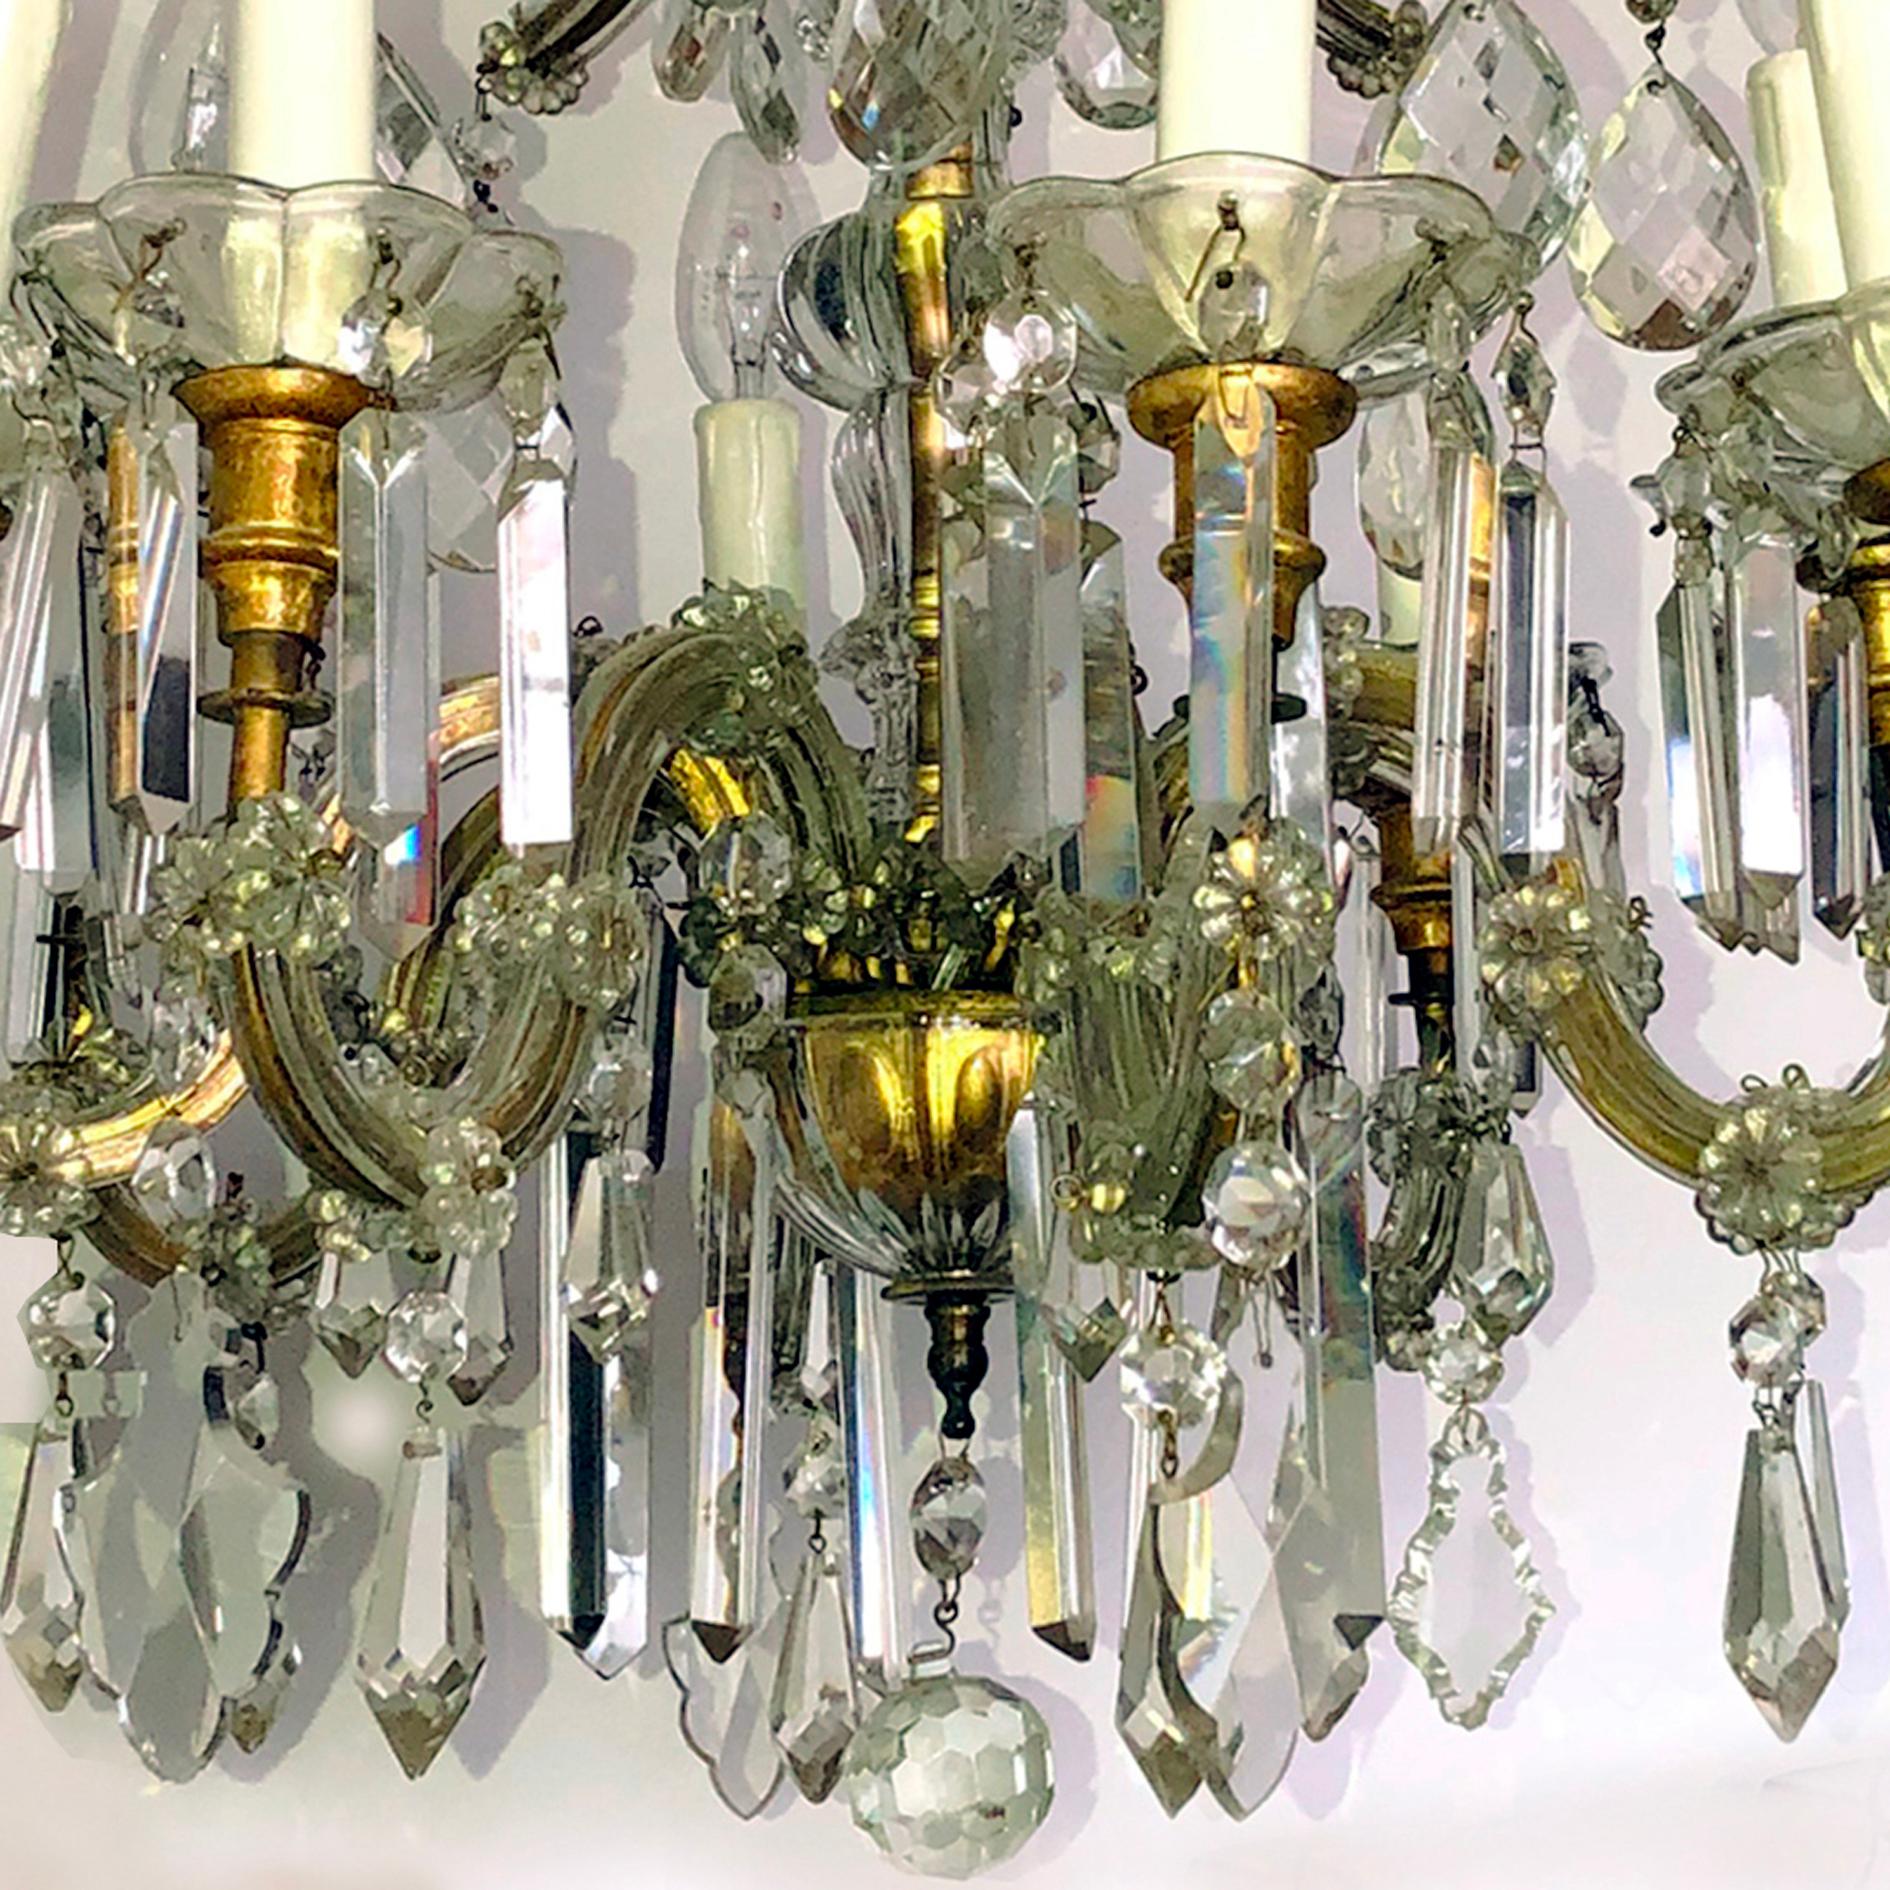 Eight Arm Maria Theresa Crystal Chandelier, Hungary or Austria, 1900s For Sale 5